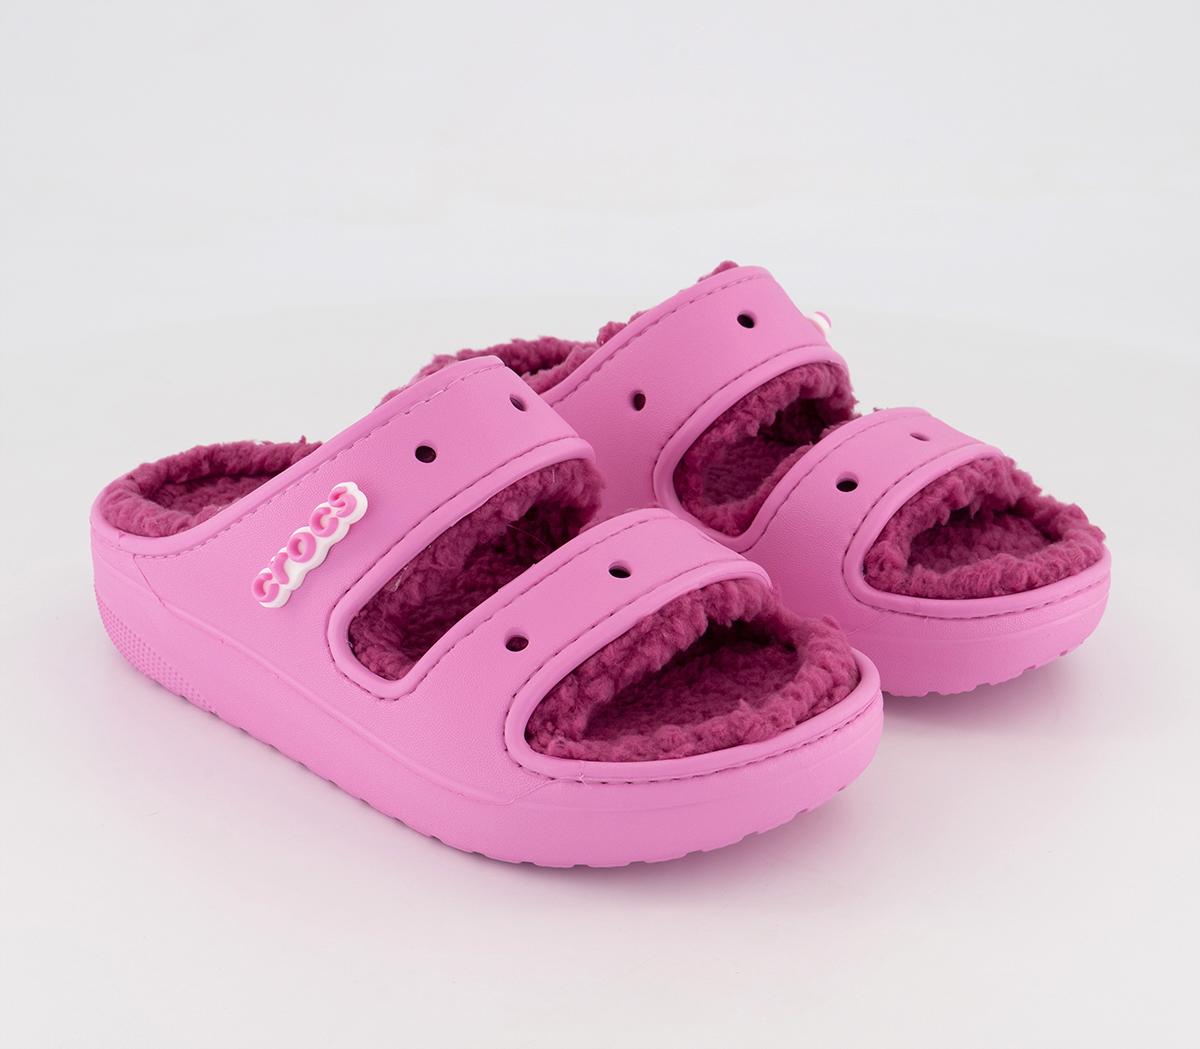 Crocs Classic Cozzzy Sandals Taffy Pink - Flat Shoes for Women